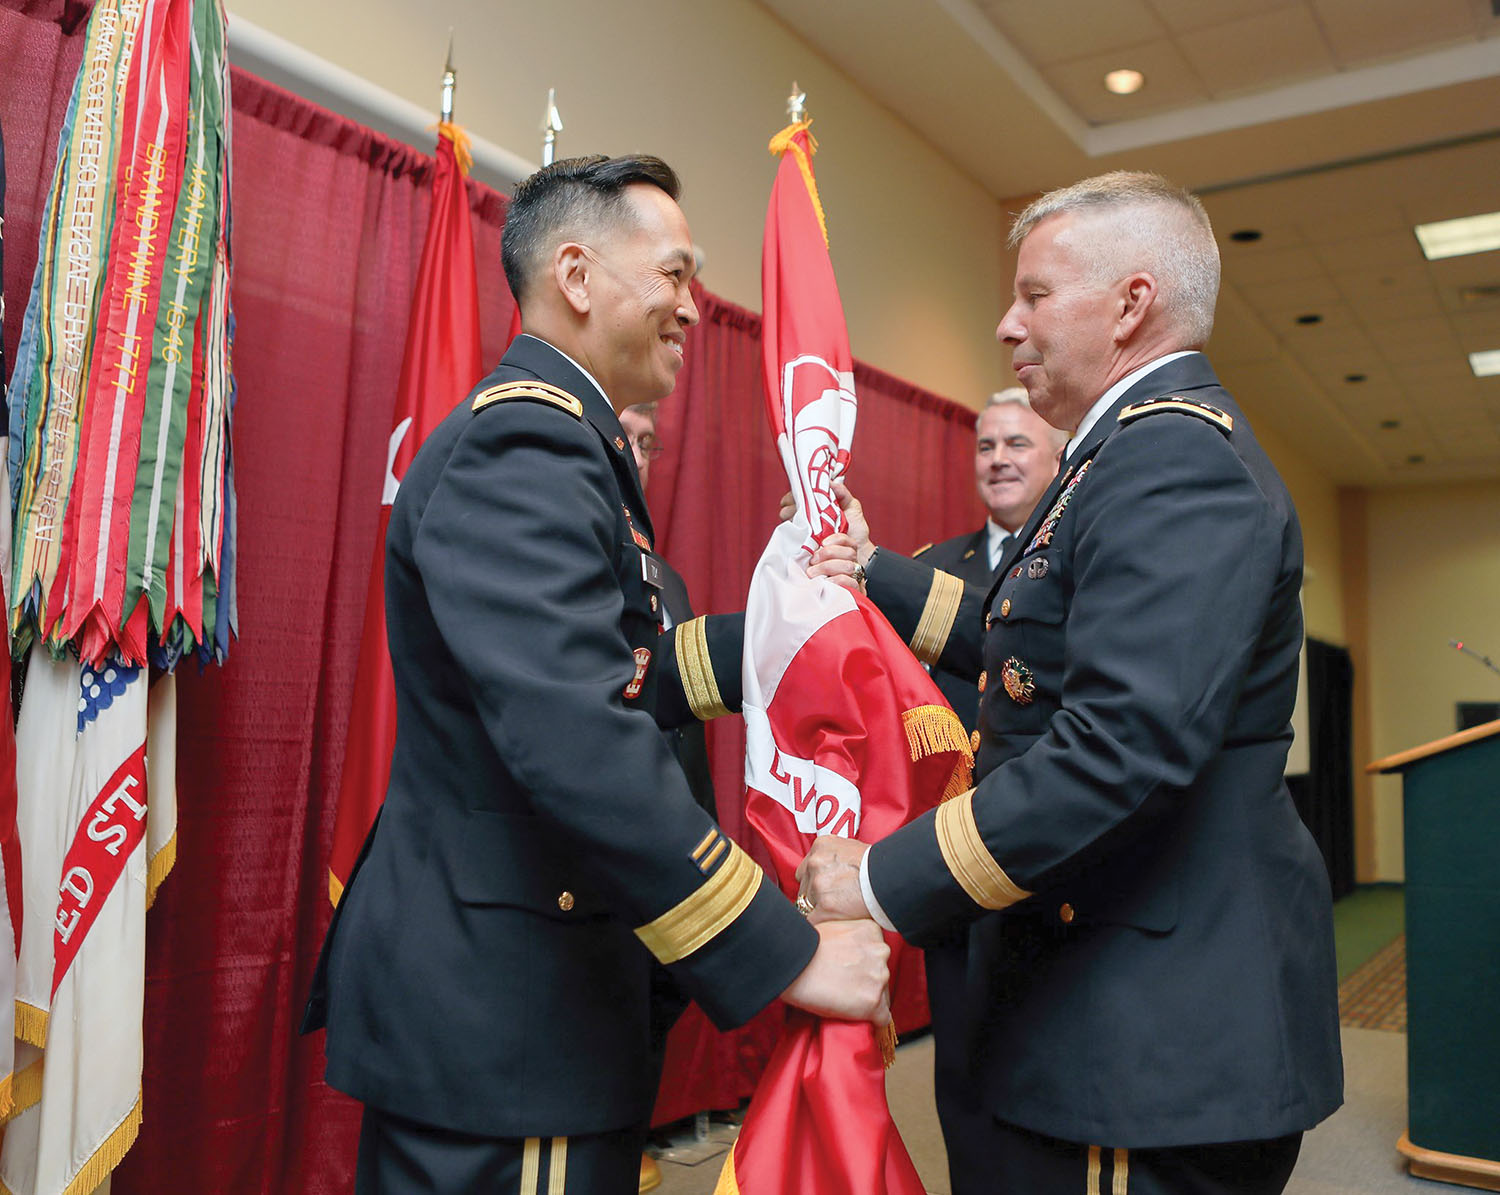 Lt. Gen. Todd Semonite, chief of engineers and commanding general of the U.S. Army Corps of Engineers, right, hands the division flag to Maj. Gen. Mark Toy. (U.S. Army Corps of Engineers photo)